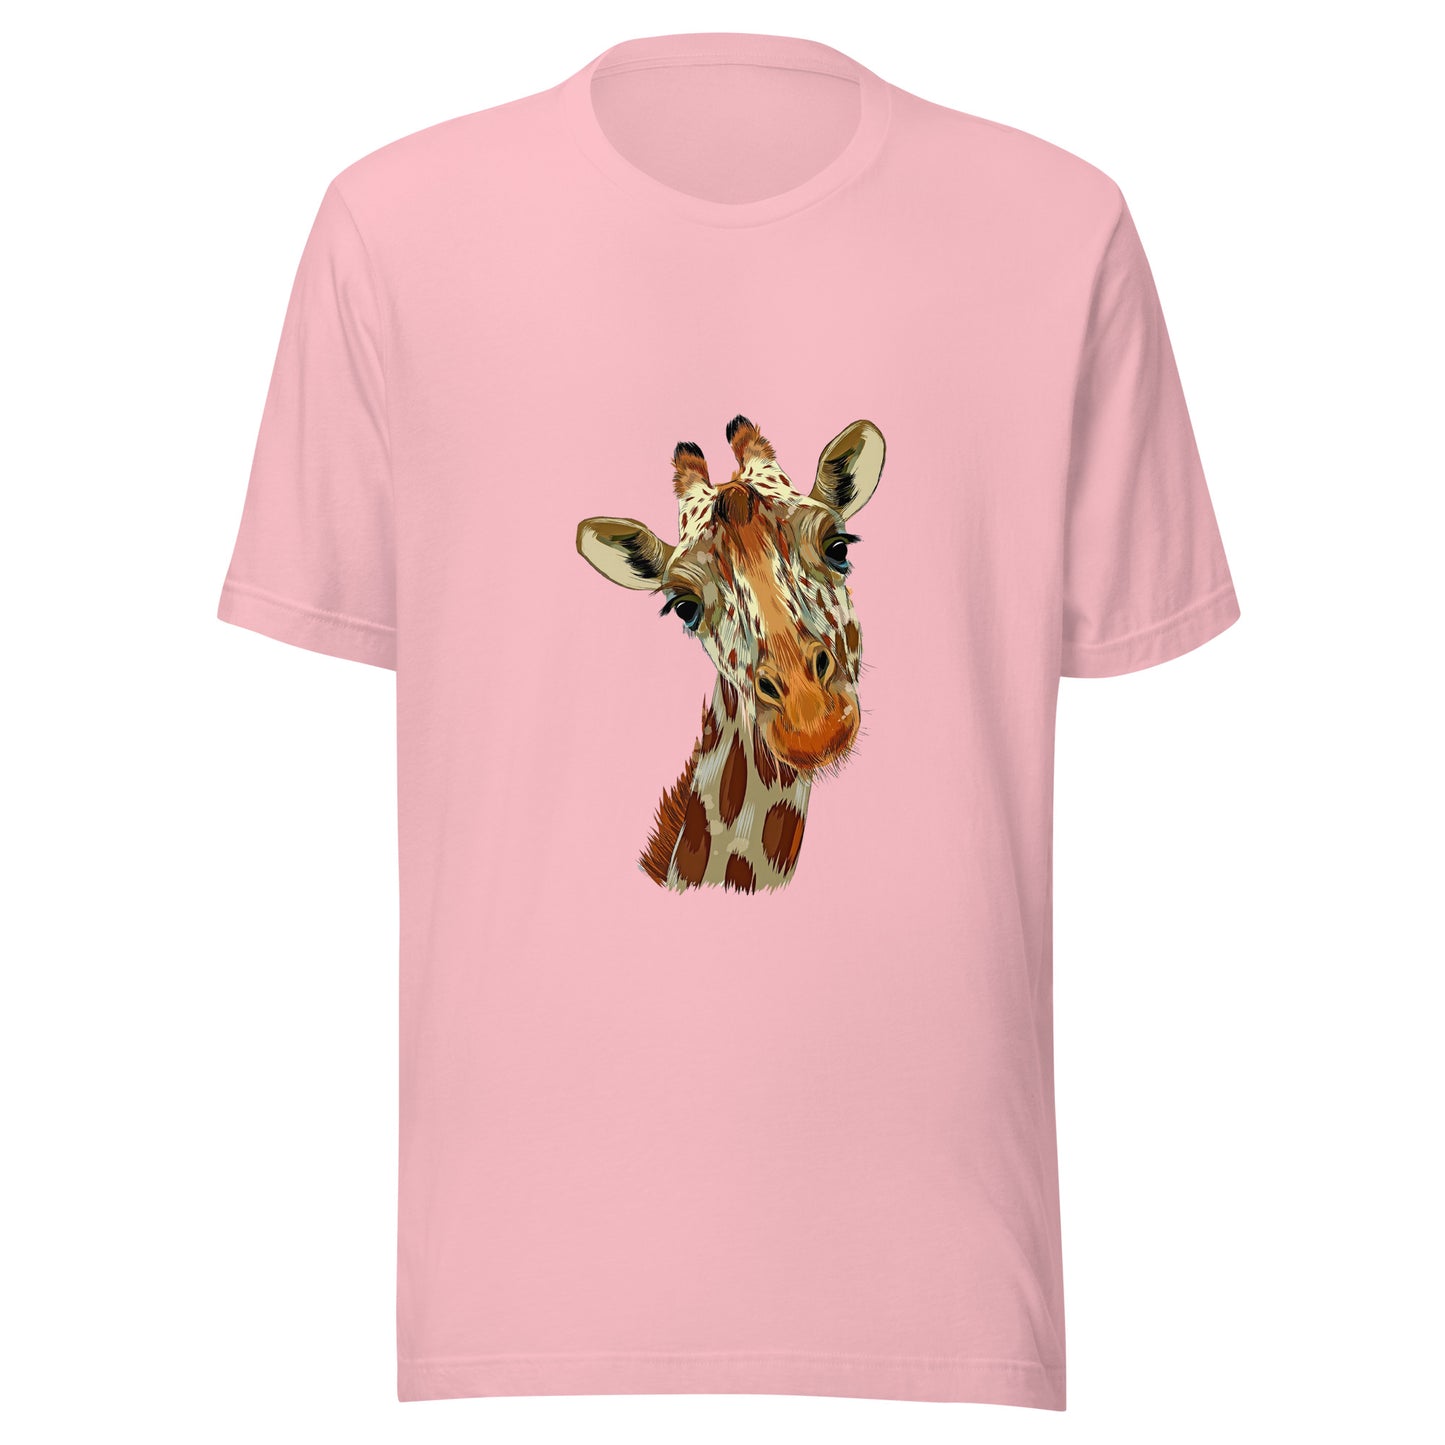 Women and Men's (Unisex) T-Shirt printed with a Quizzical Giraffe